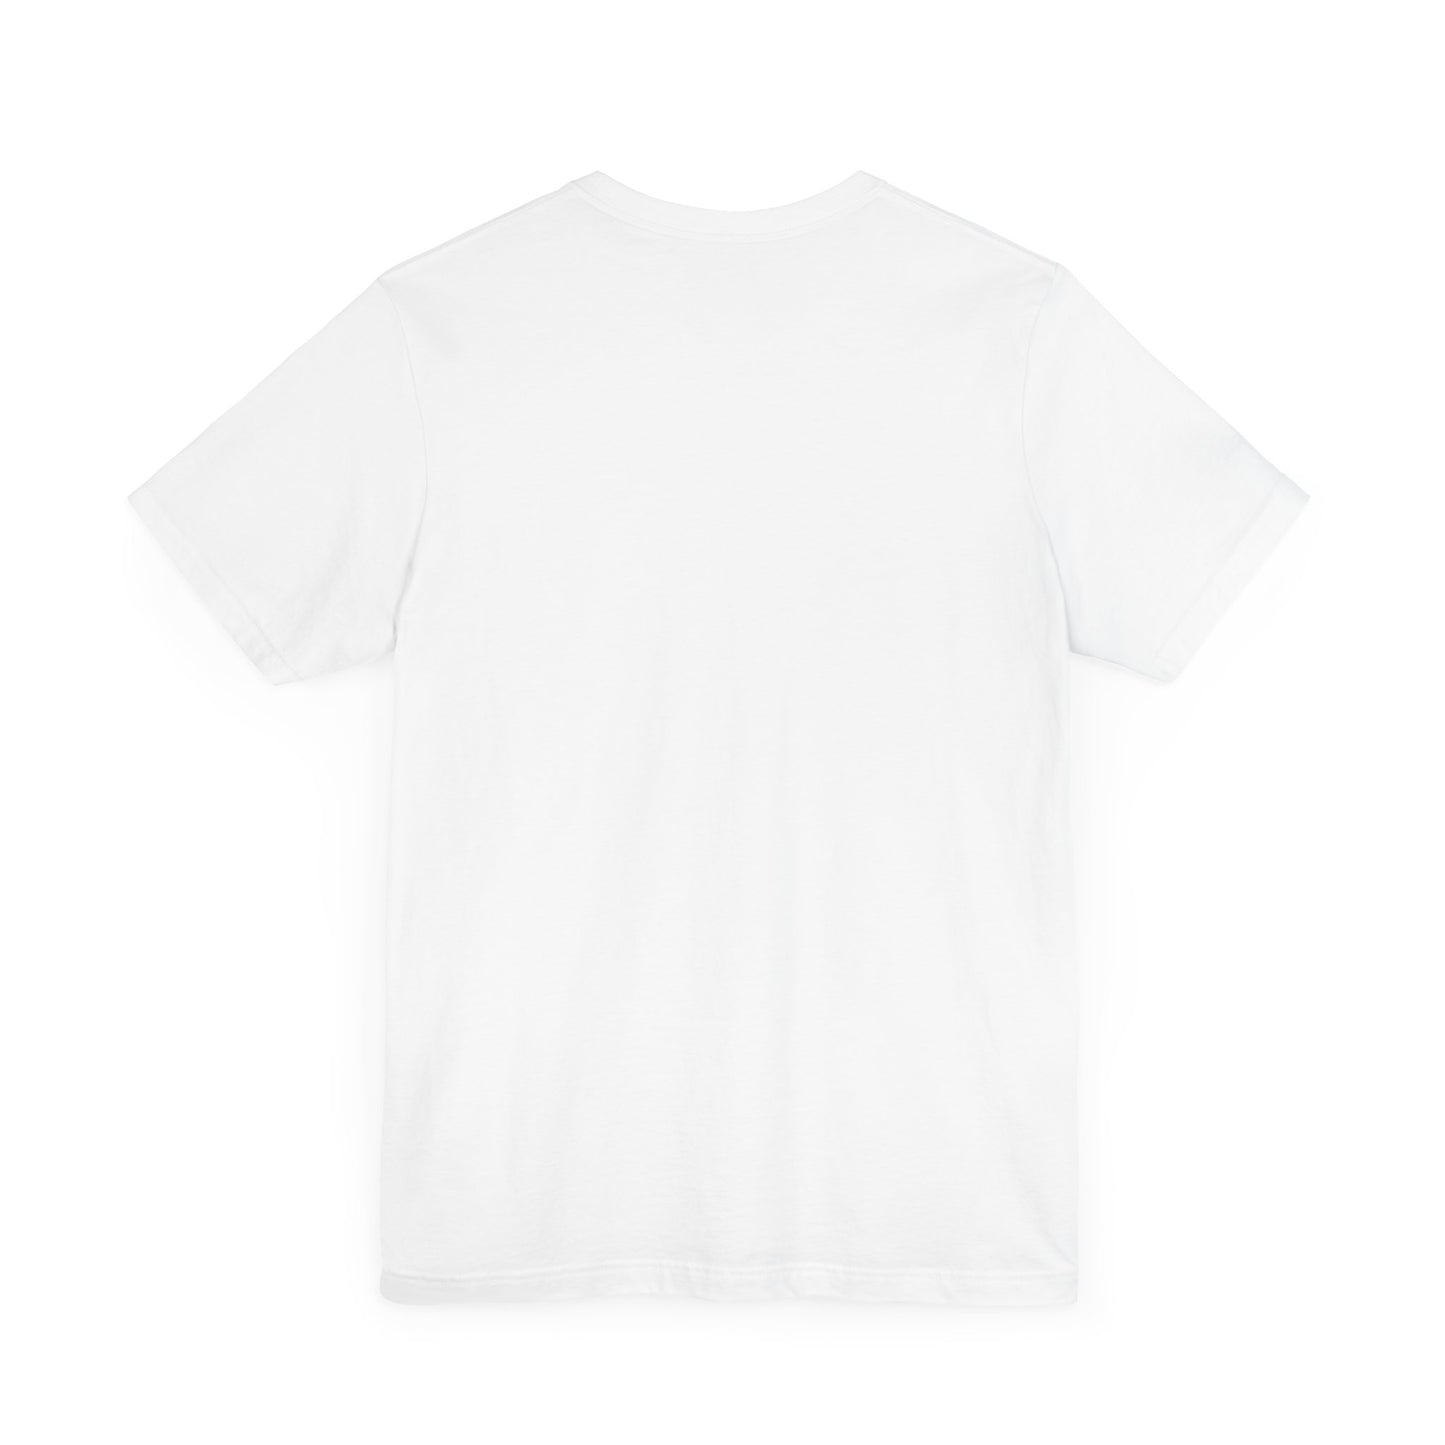 The Snowboarder - Tee